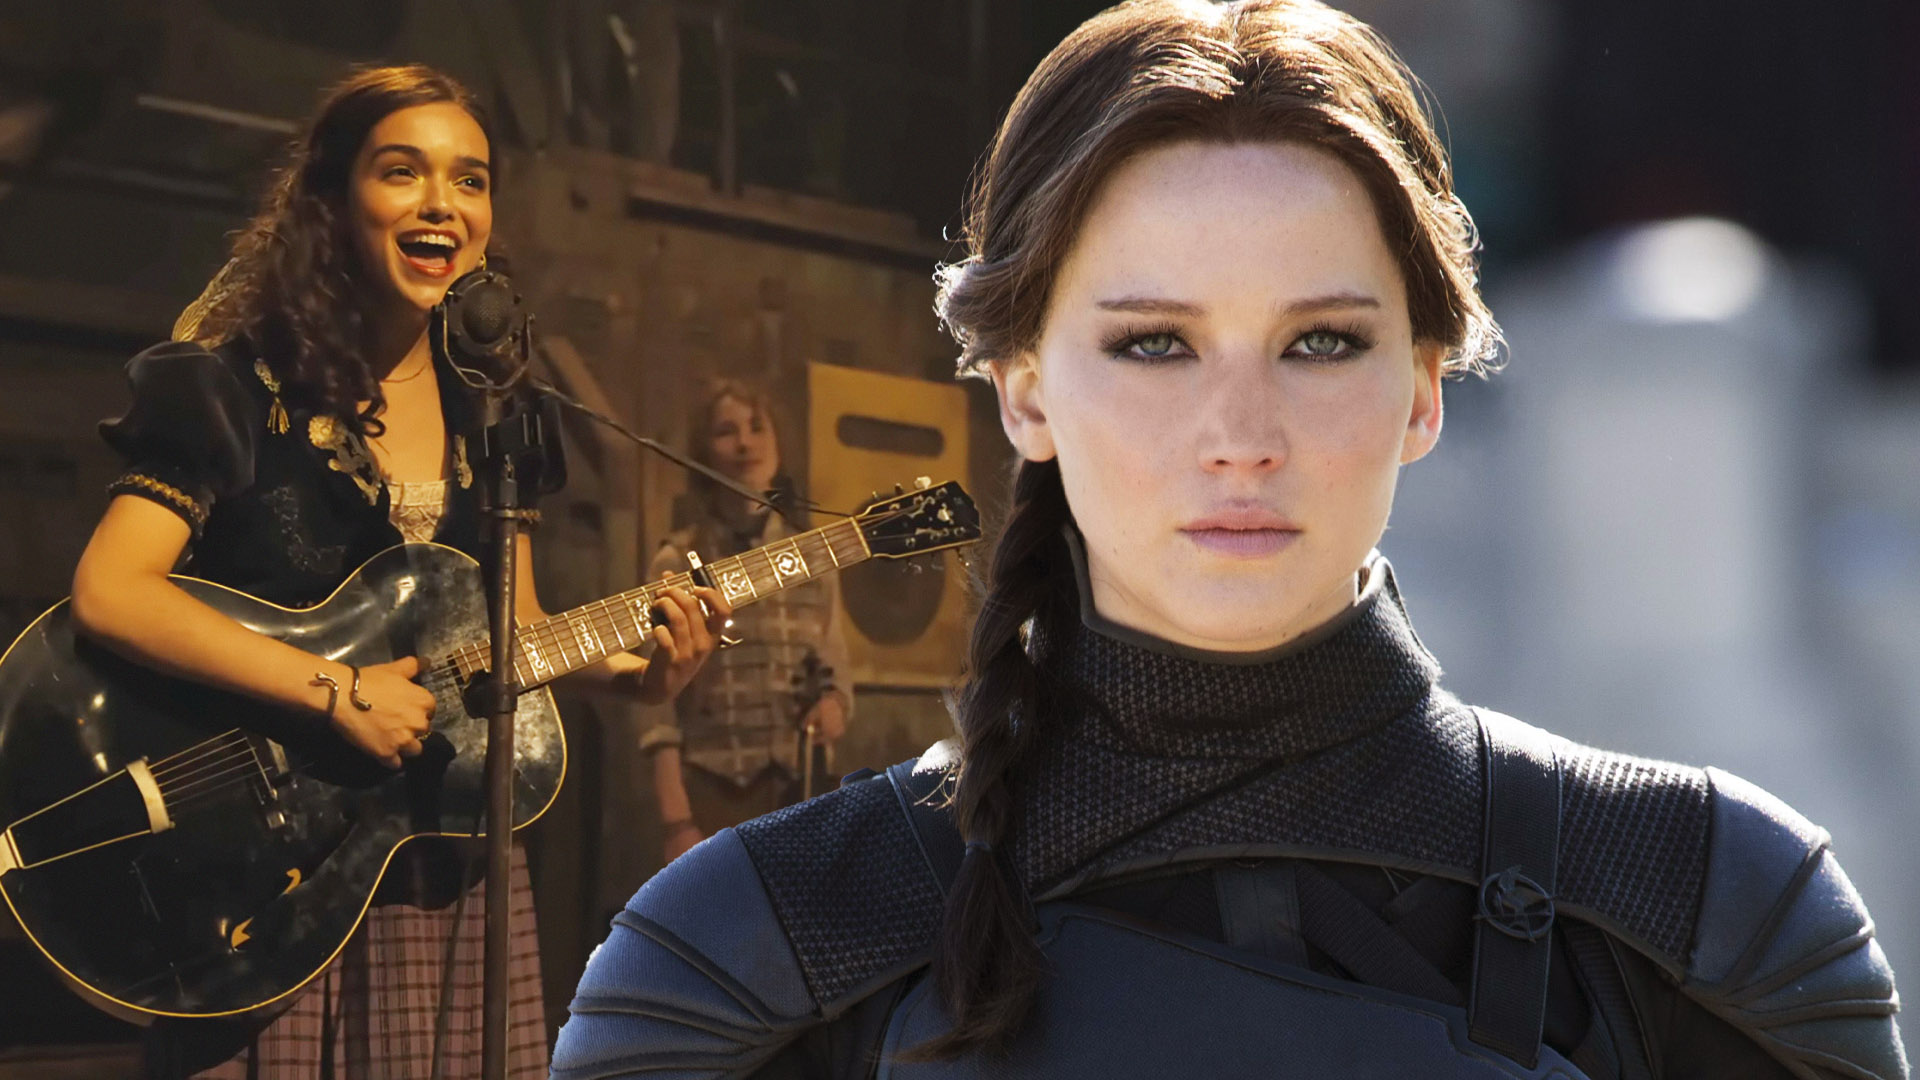 Ballad Of Songbirds & Snakes: Will Katniss Appear in Hunger Games Prequel?